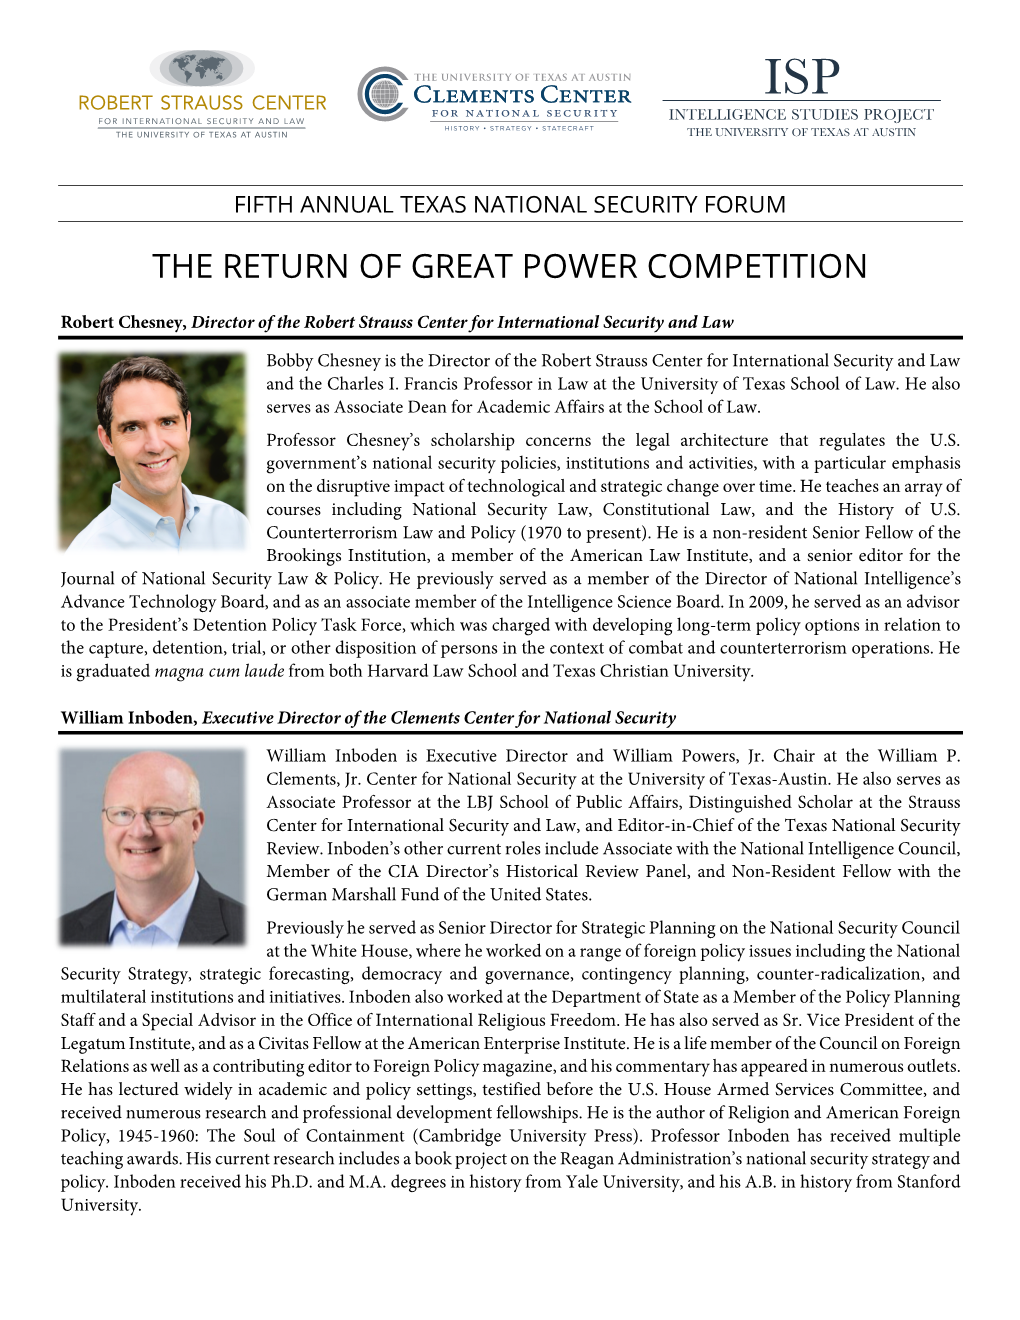 The Return of Great Power Competition